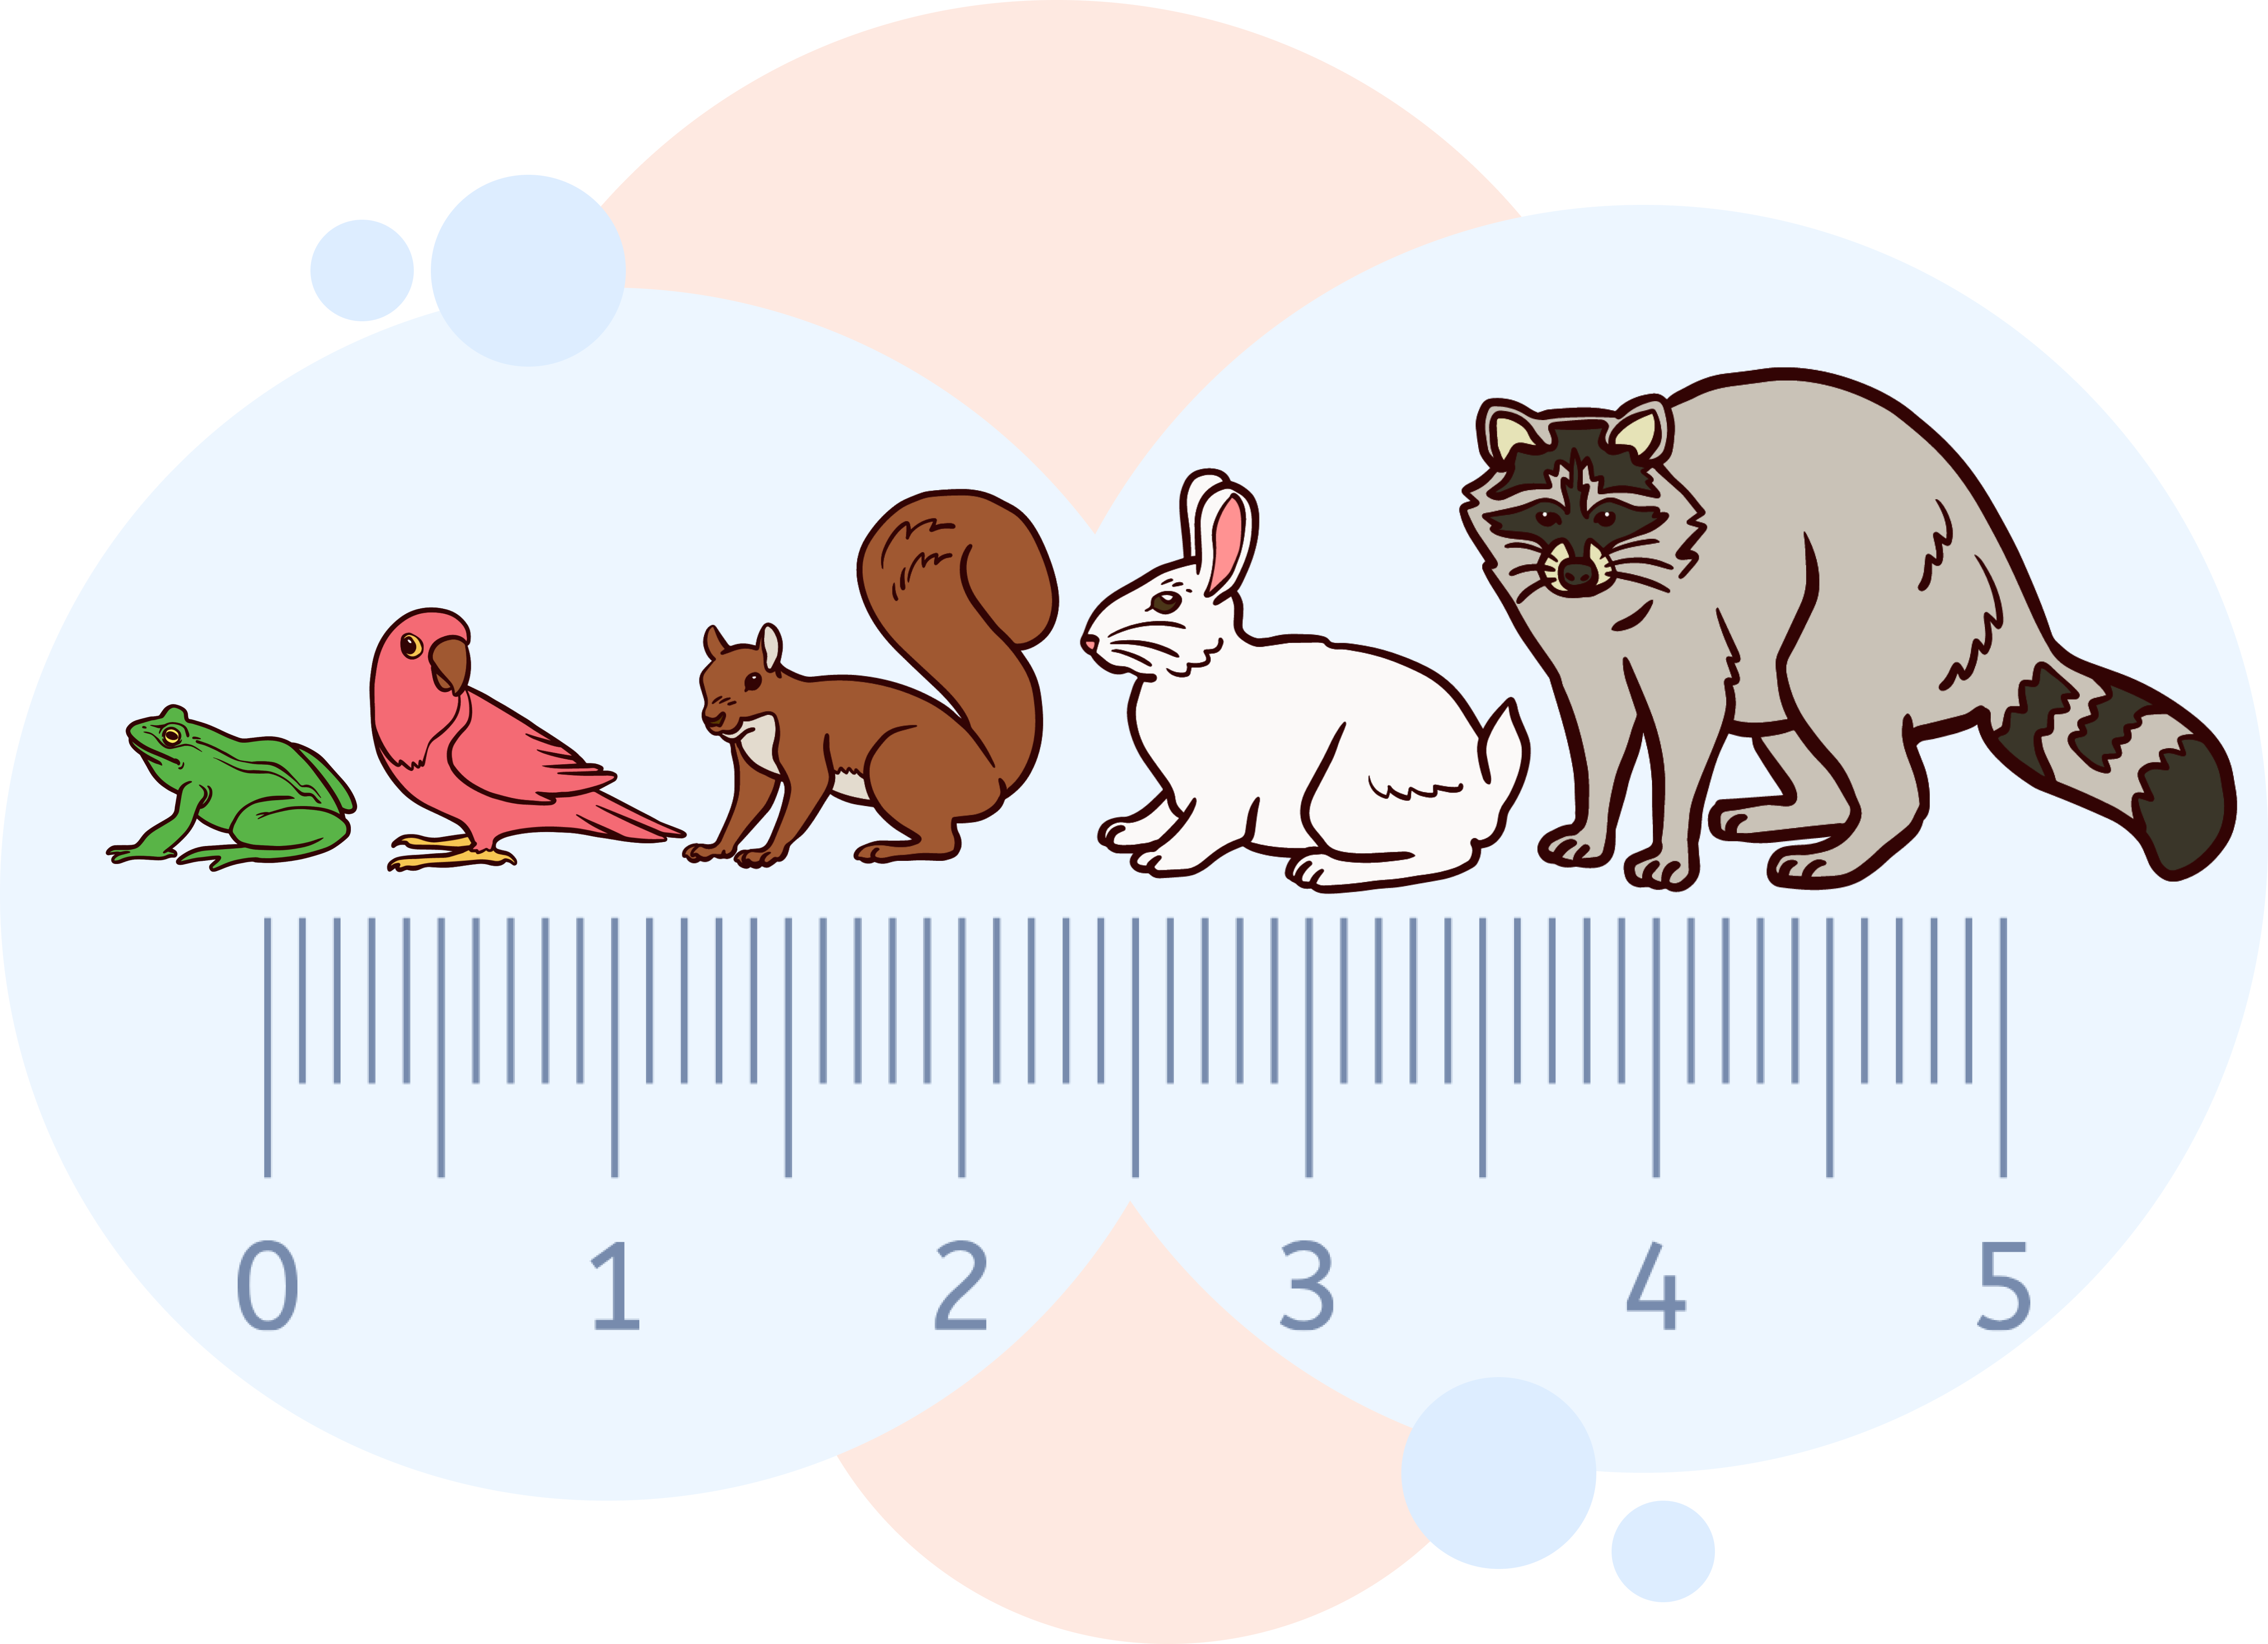 Comparing Your Baby's Size to Animals